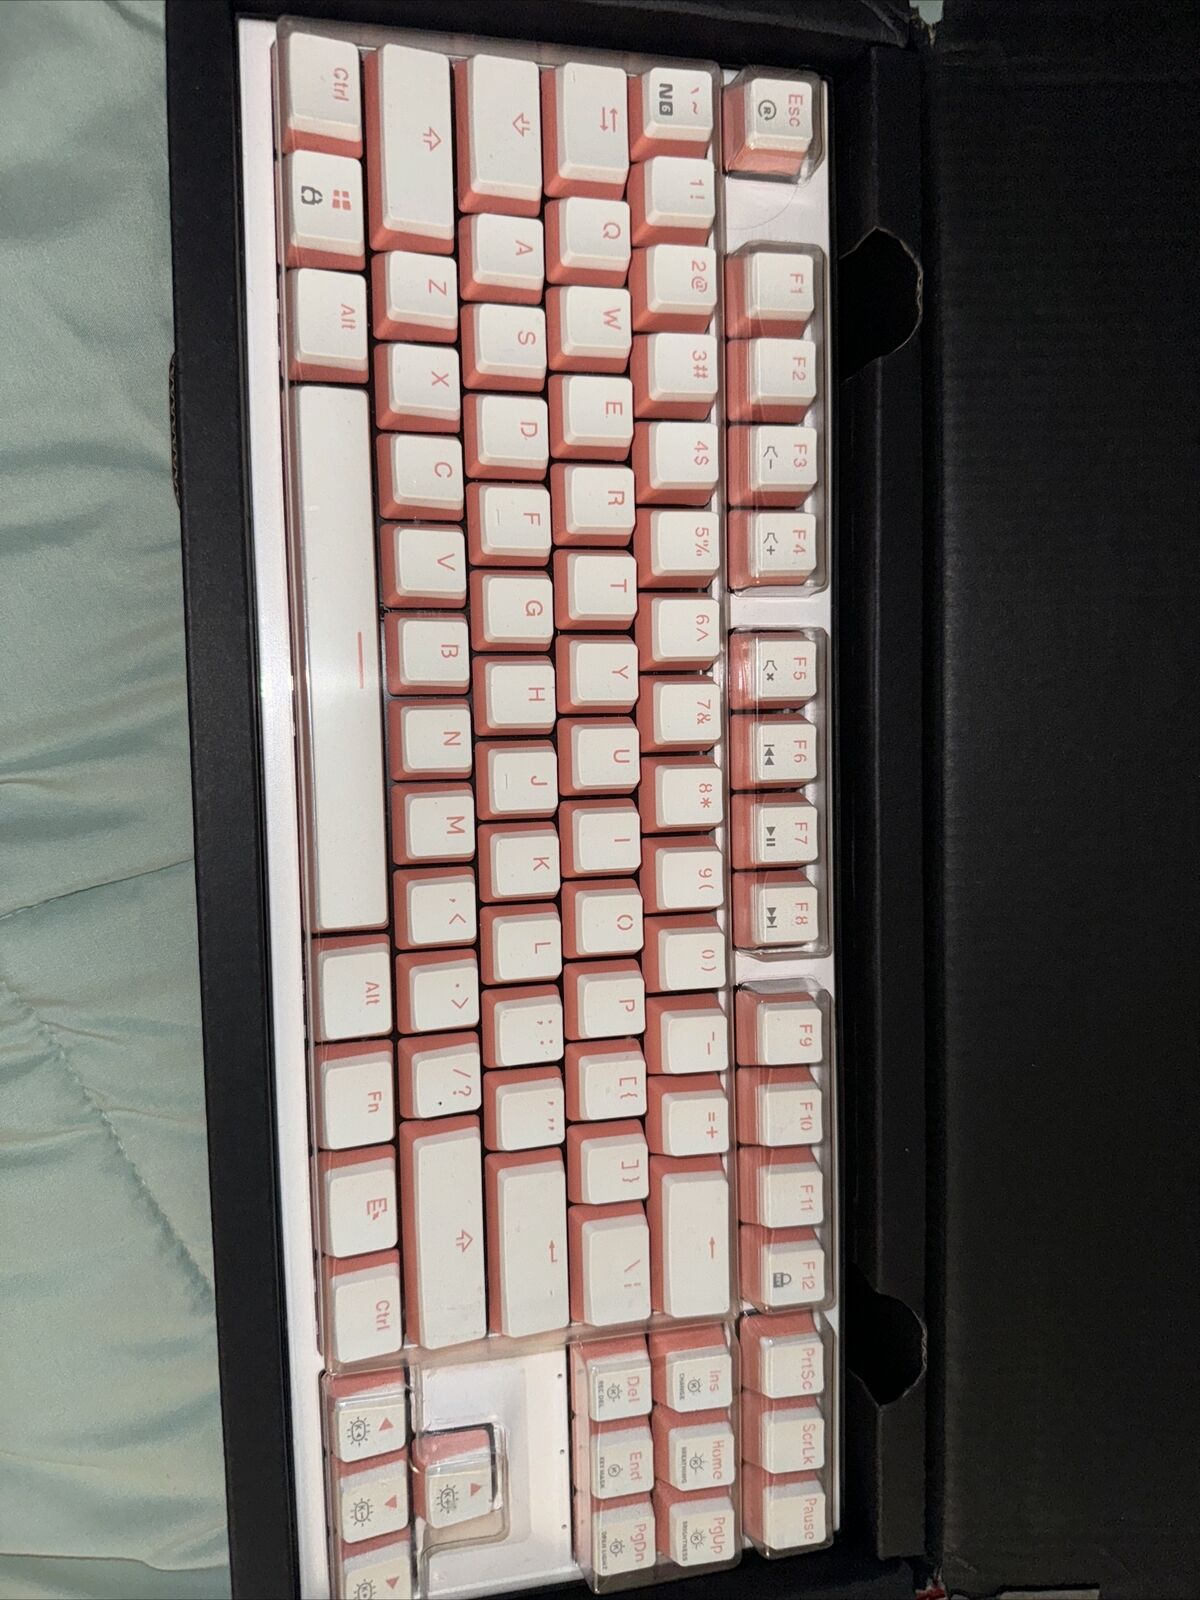 Hexgears X3 Pink/white Gold Box Switch Kailh